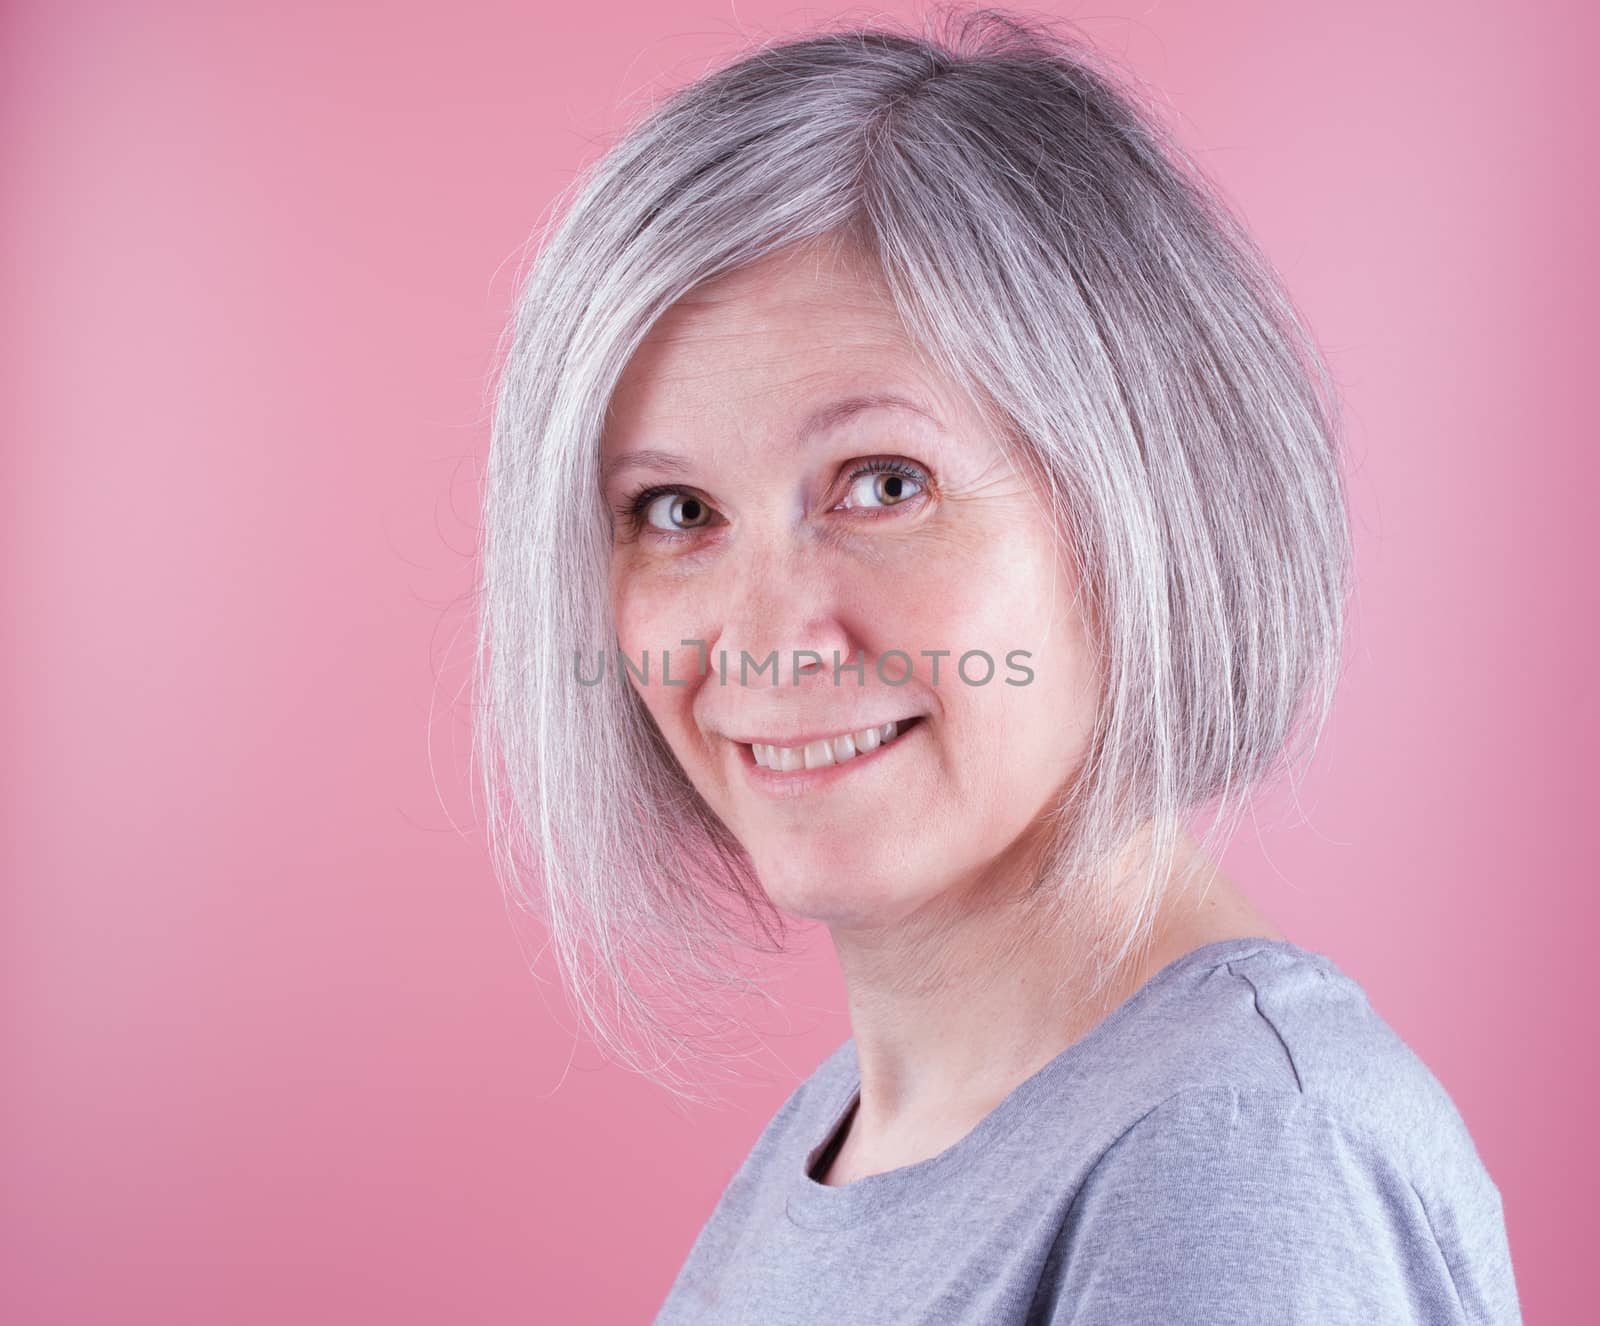 gray haired caucasian woman by lanalanglois